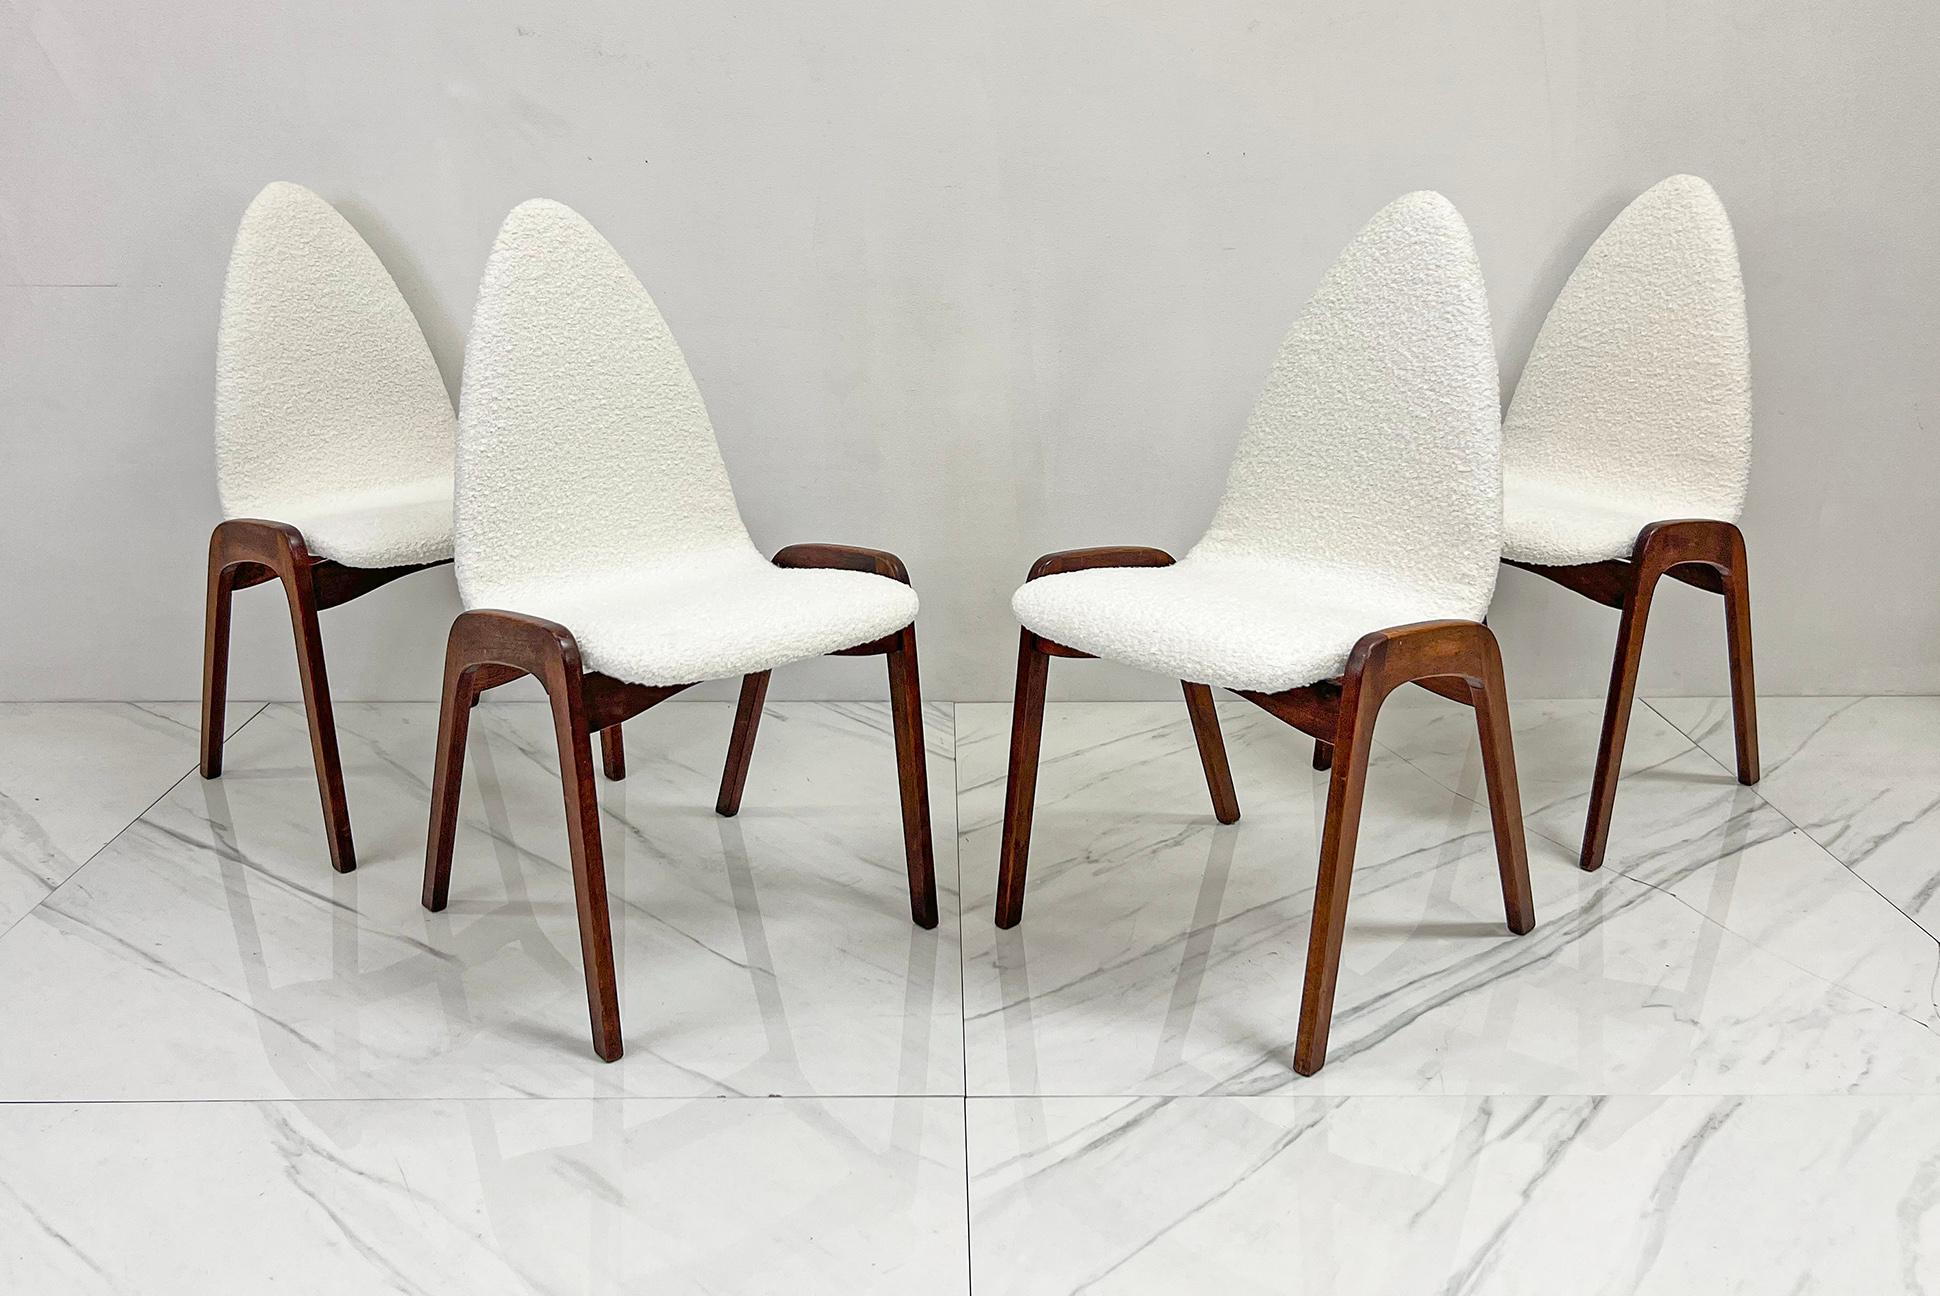 Available right now, we have this set of four exquisite dining chairs designed by the enigmatic Chet Beardsley for California Living Designs Inc., these mid-century marvels harken back to the stylish sensibilities of the 1960s. While little